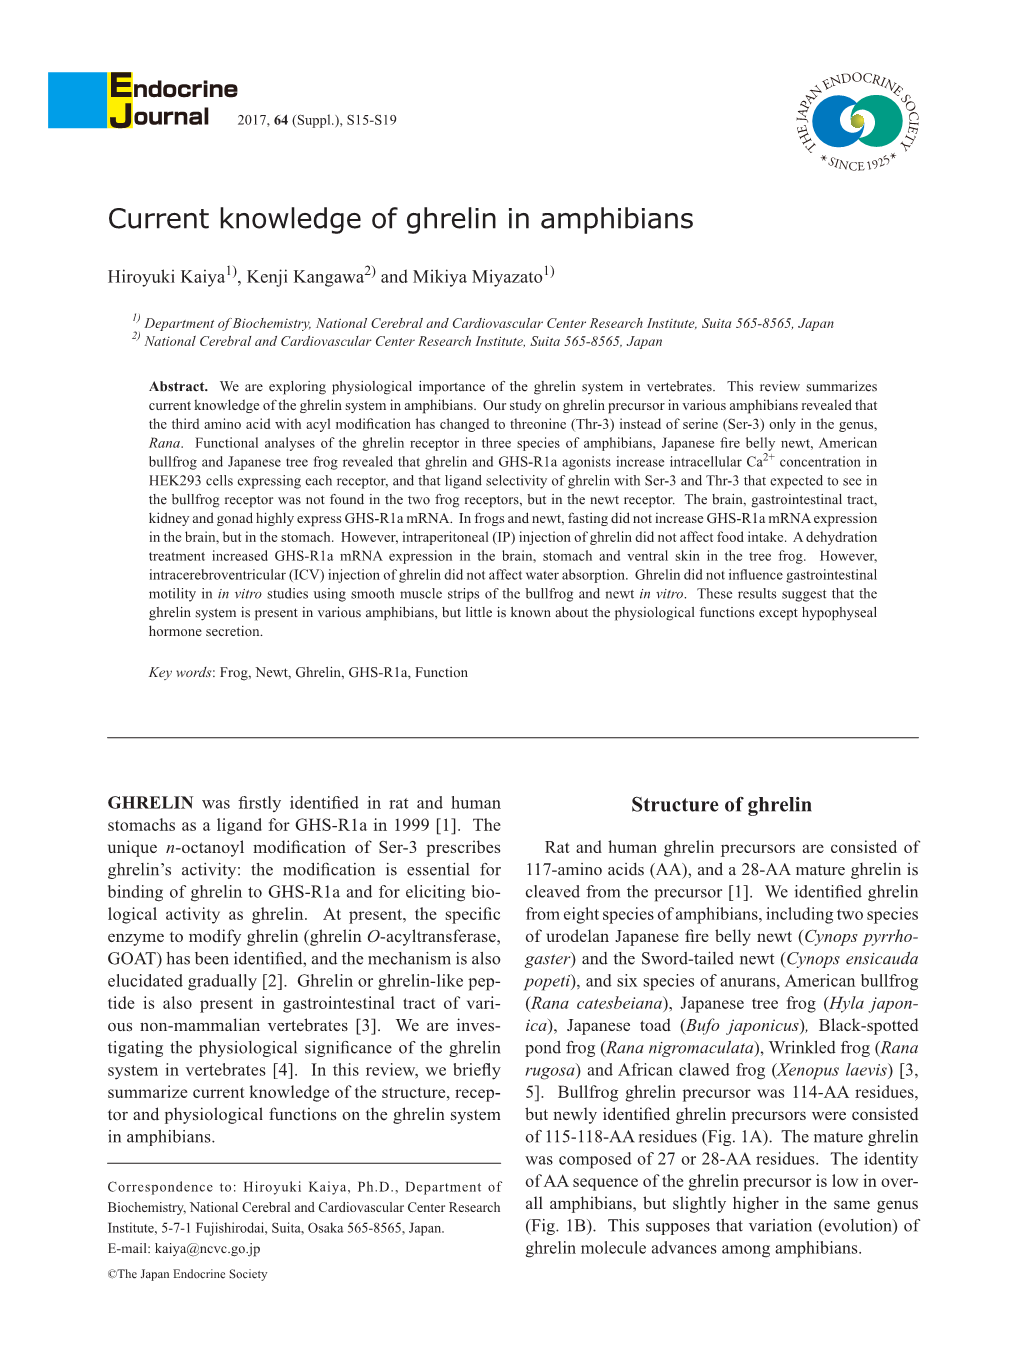 Current Knowledge of Ghrelin in Amphibians